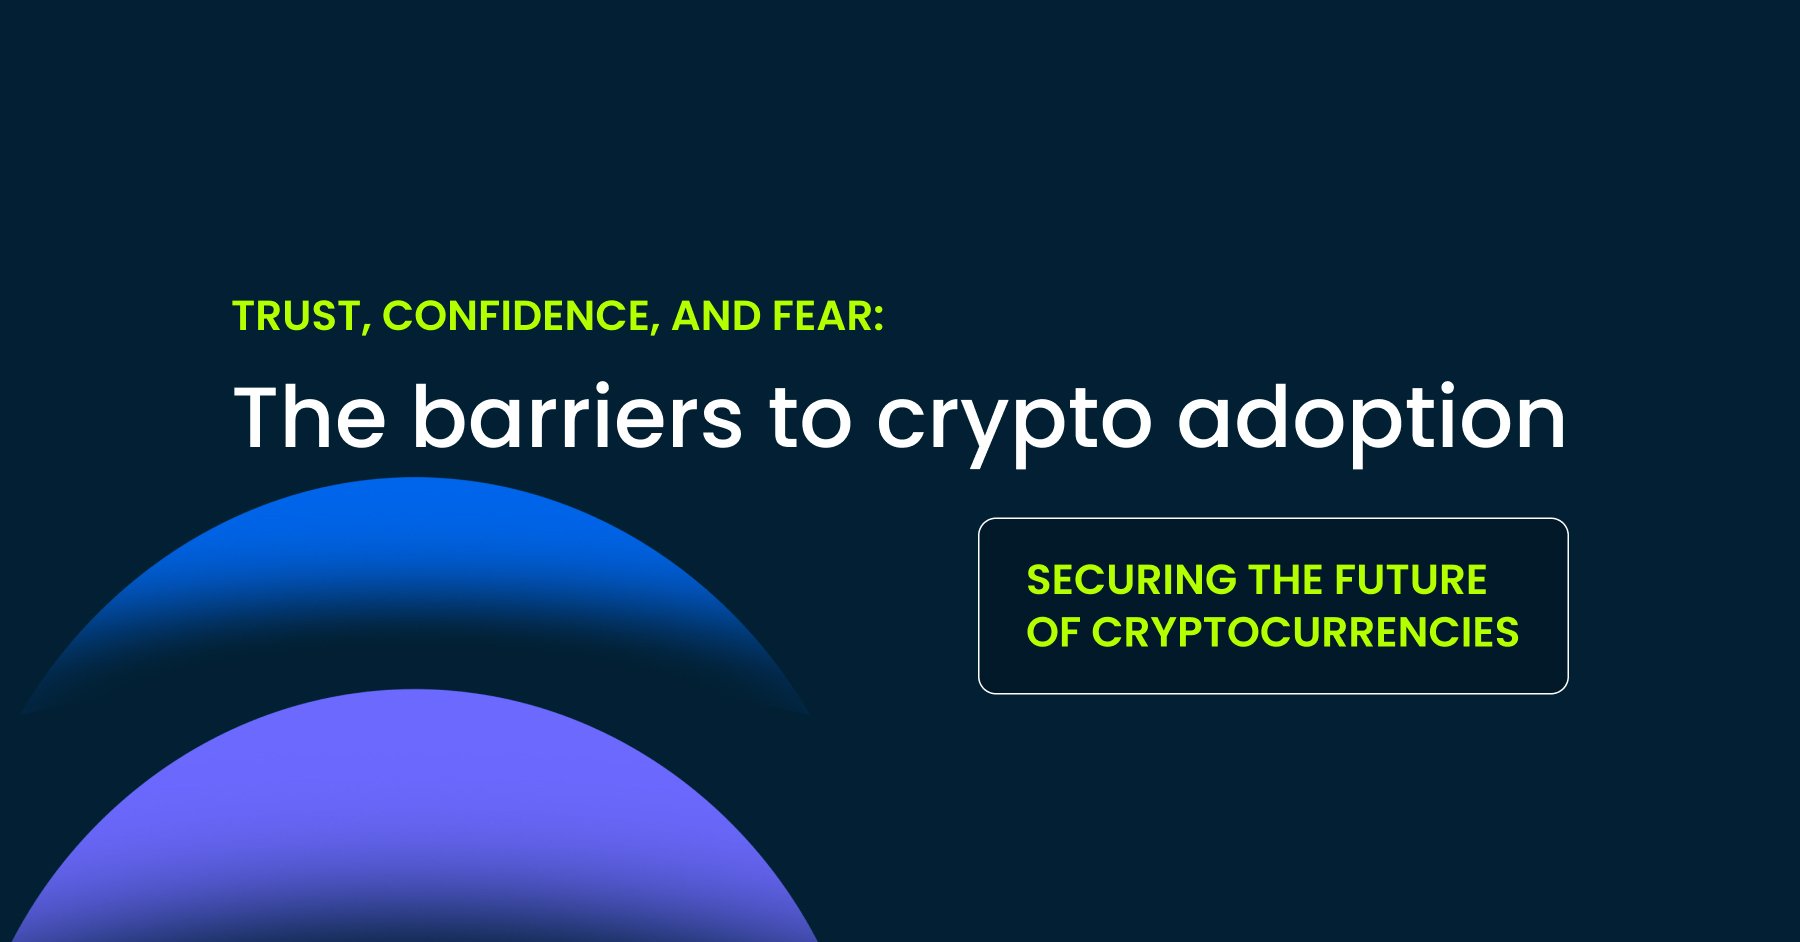 The barriers to crypto adoption